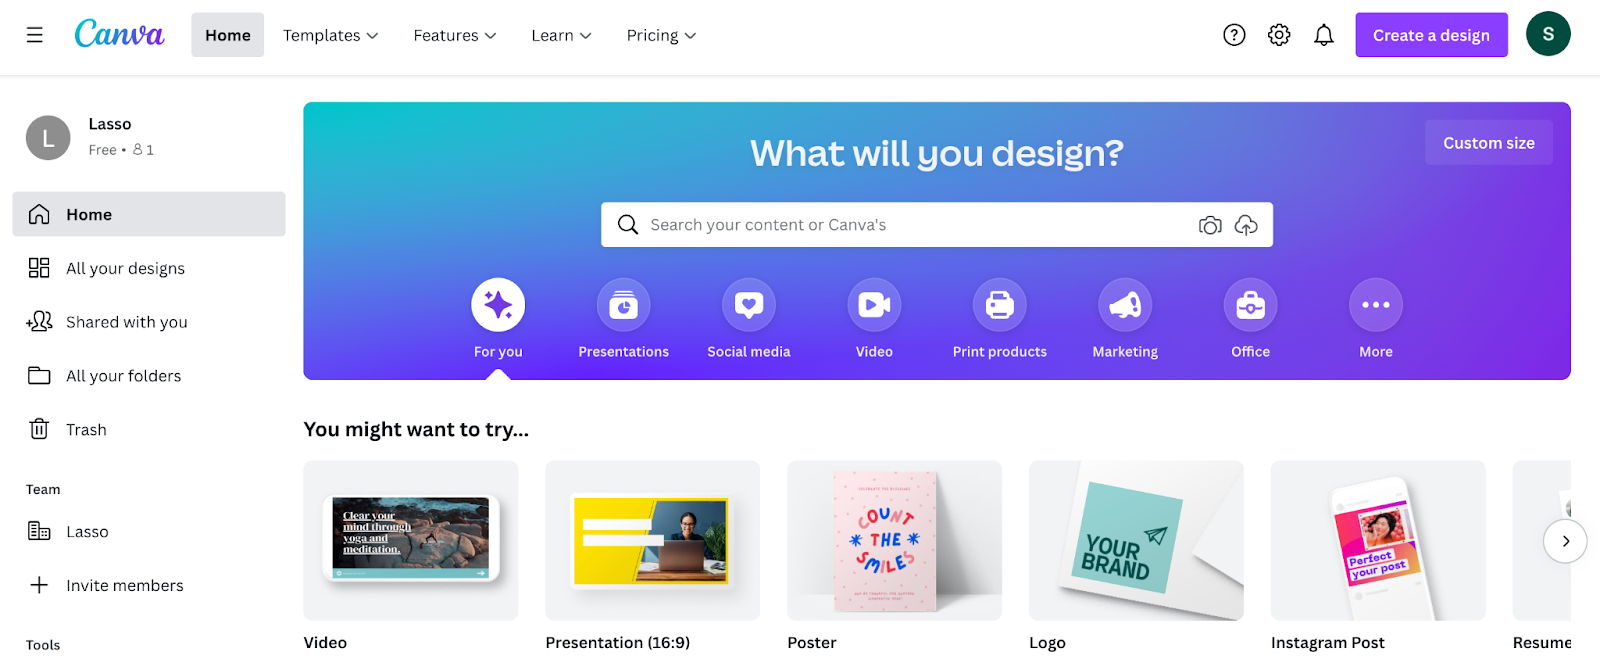 canva home page